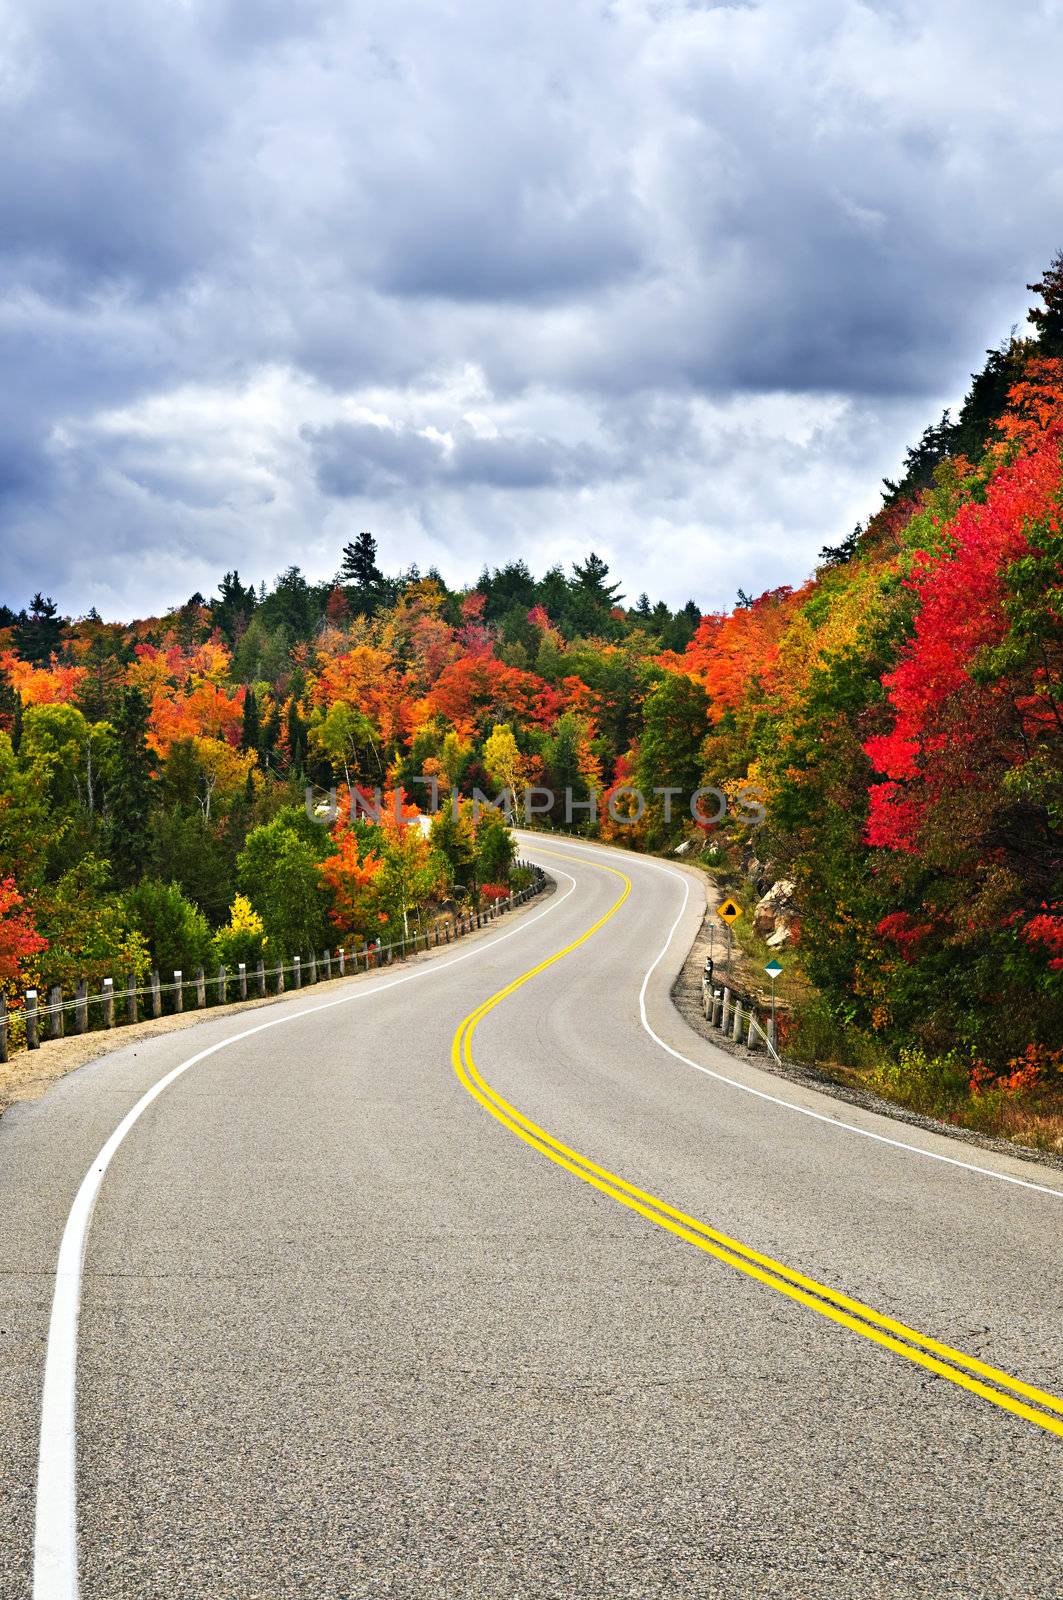 Fall scenic highway in northern Ontario, Canada